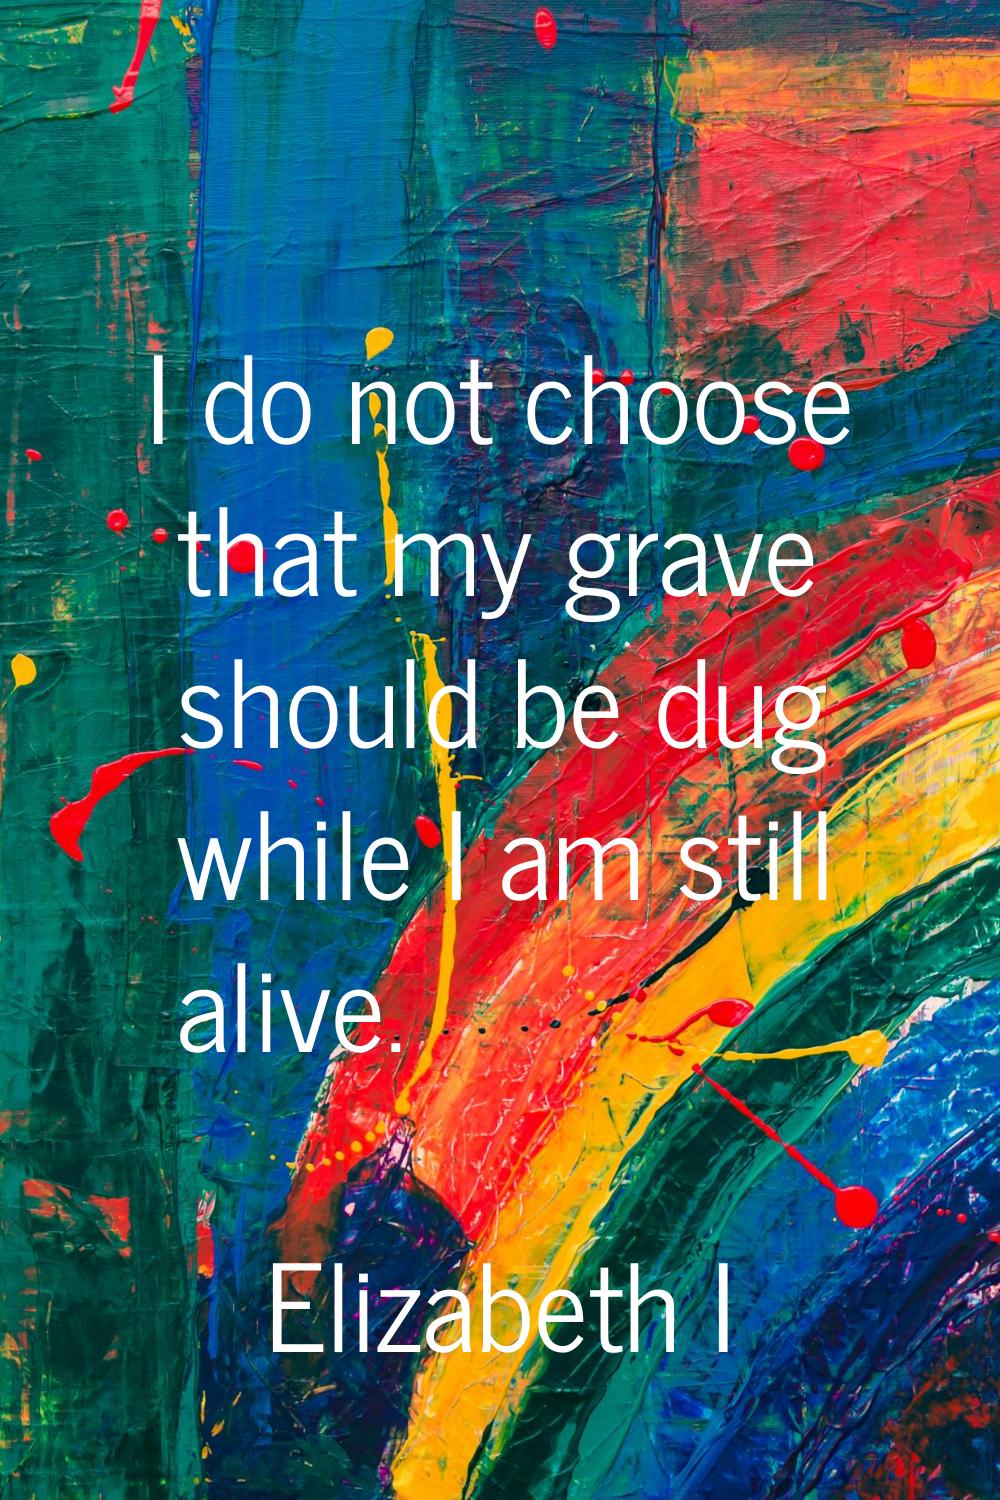 I do not choose that my grave should be dug while I am still alive.